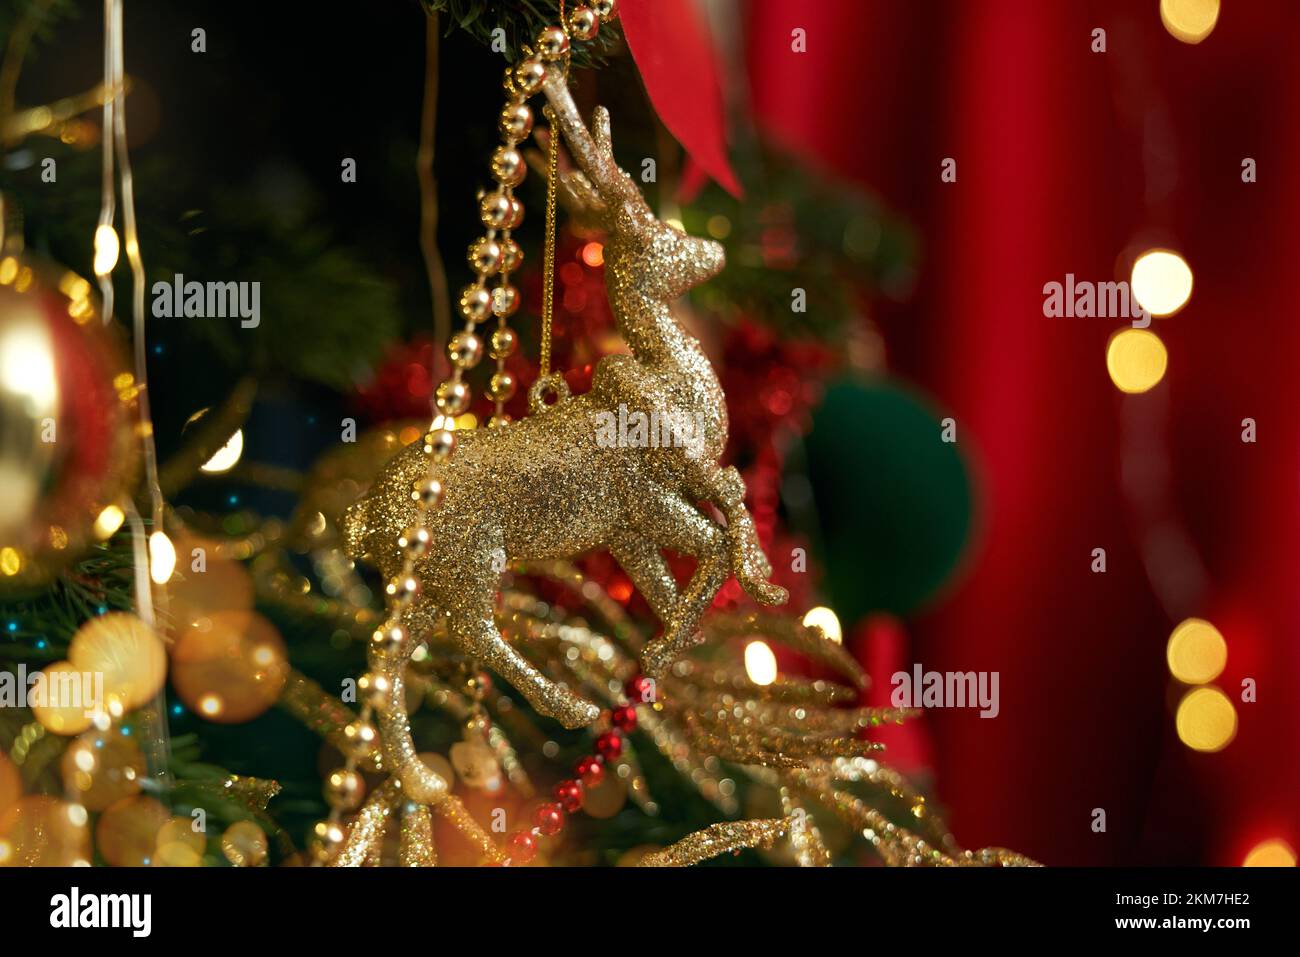 Close up of Christmas tree standing, decorated with golden deer, garlands, balls and bows. People celebrating New Year in cozy decorated room. Concept Stock Photo